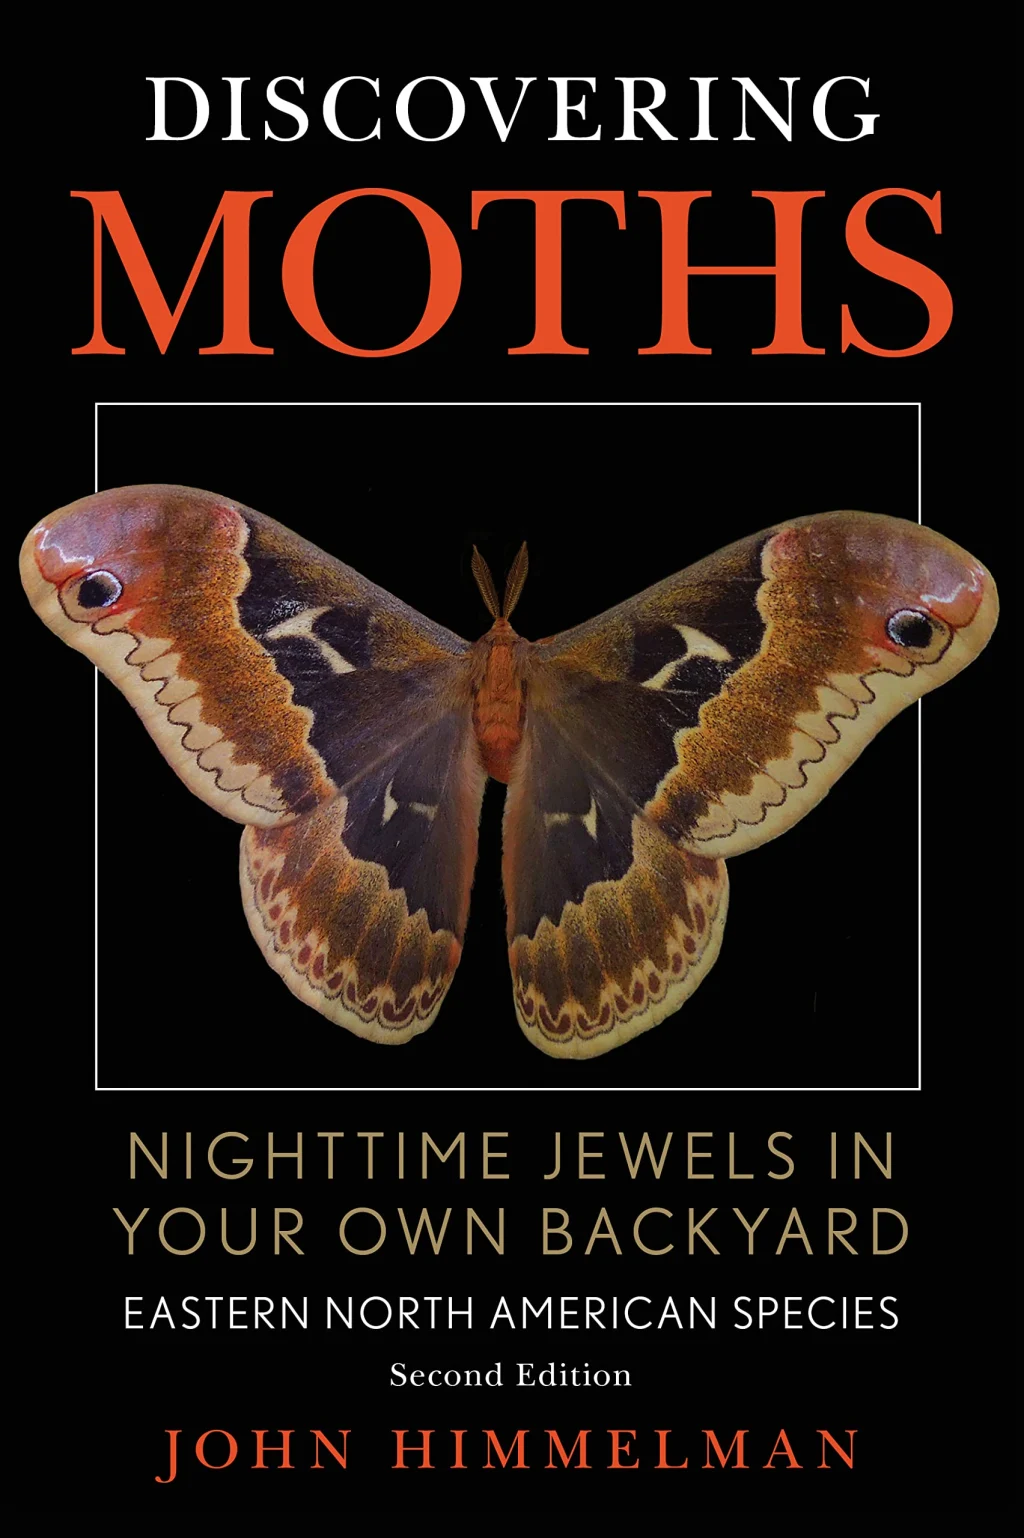 Mysteries Unveiled: Embarking on Nocturnal Adventures with “Discovering Moths: Nighttime Jewels in Your Own Backyard” by Jim Himmelman